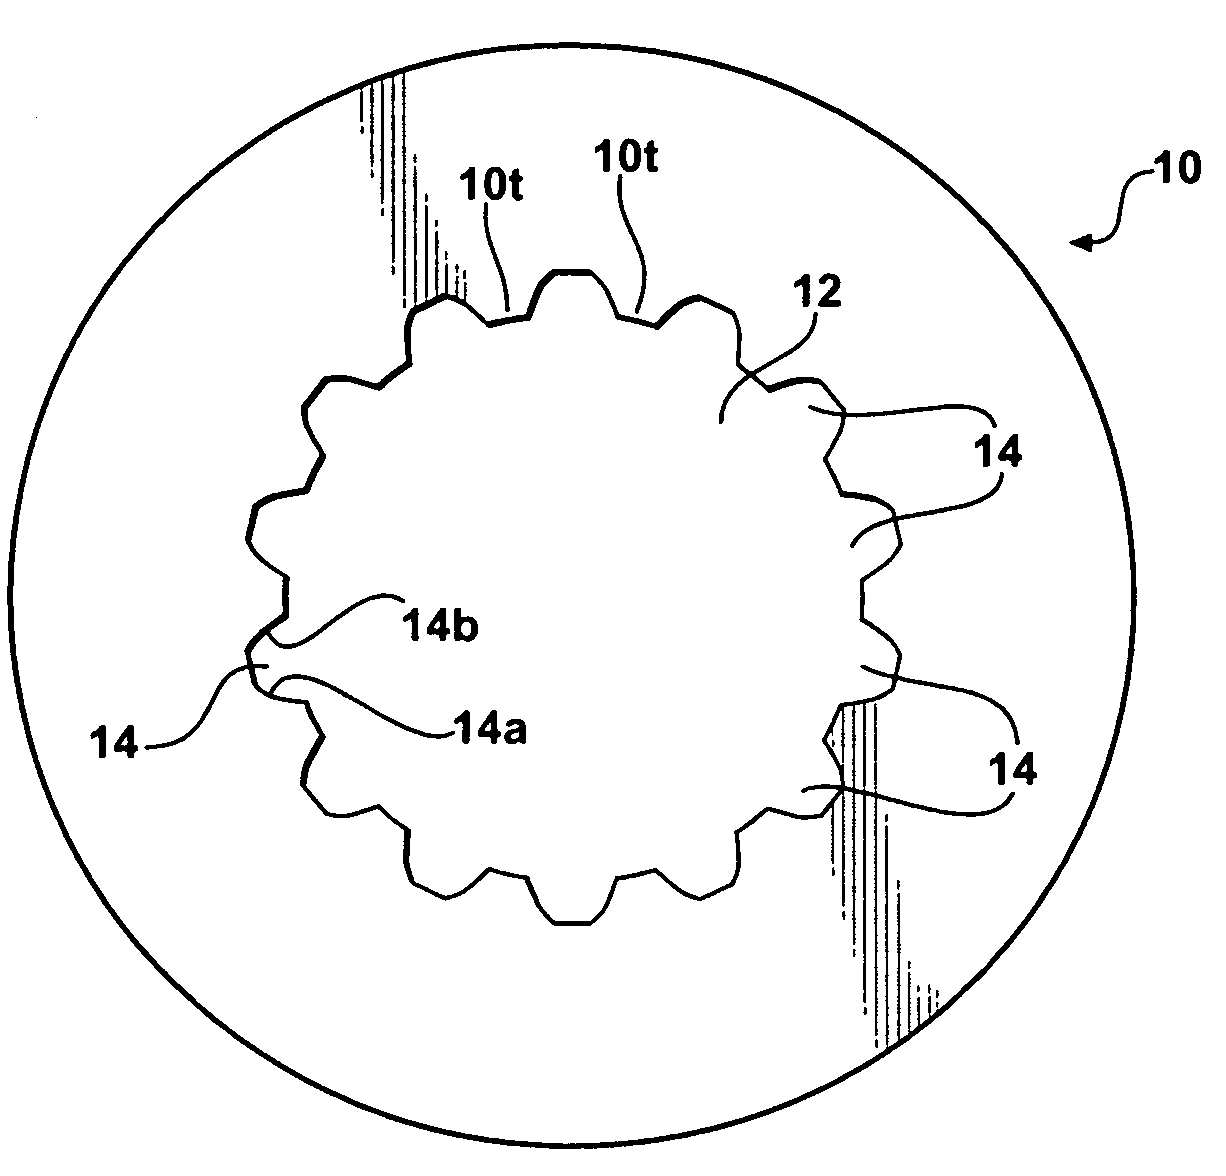 Brake disc assembly and method of construction